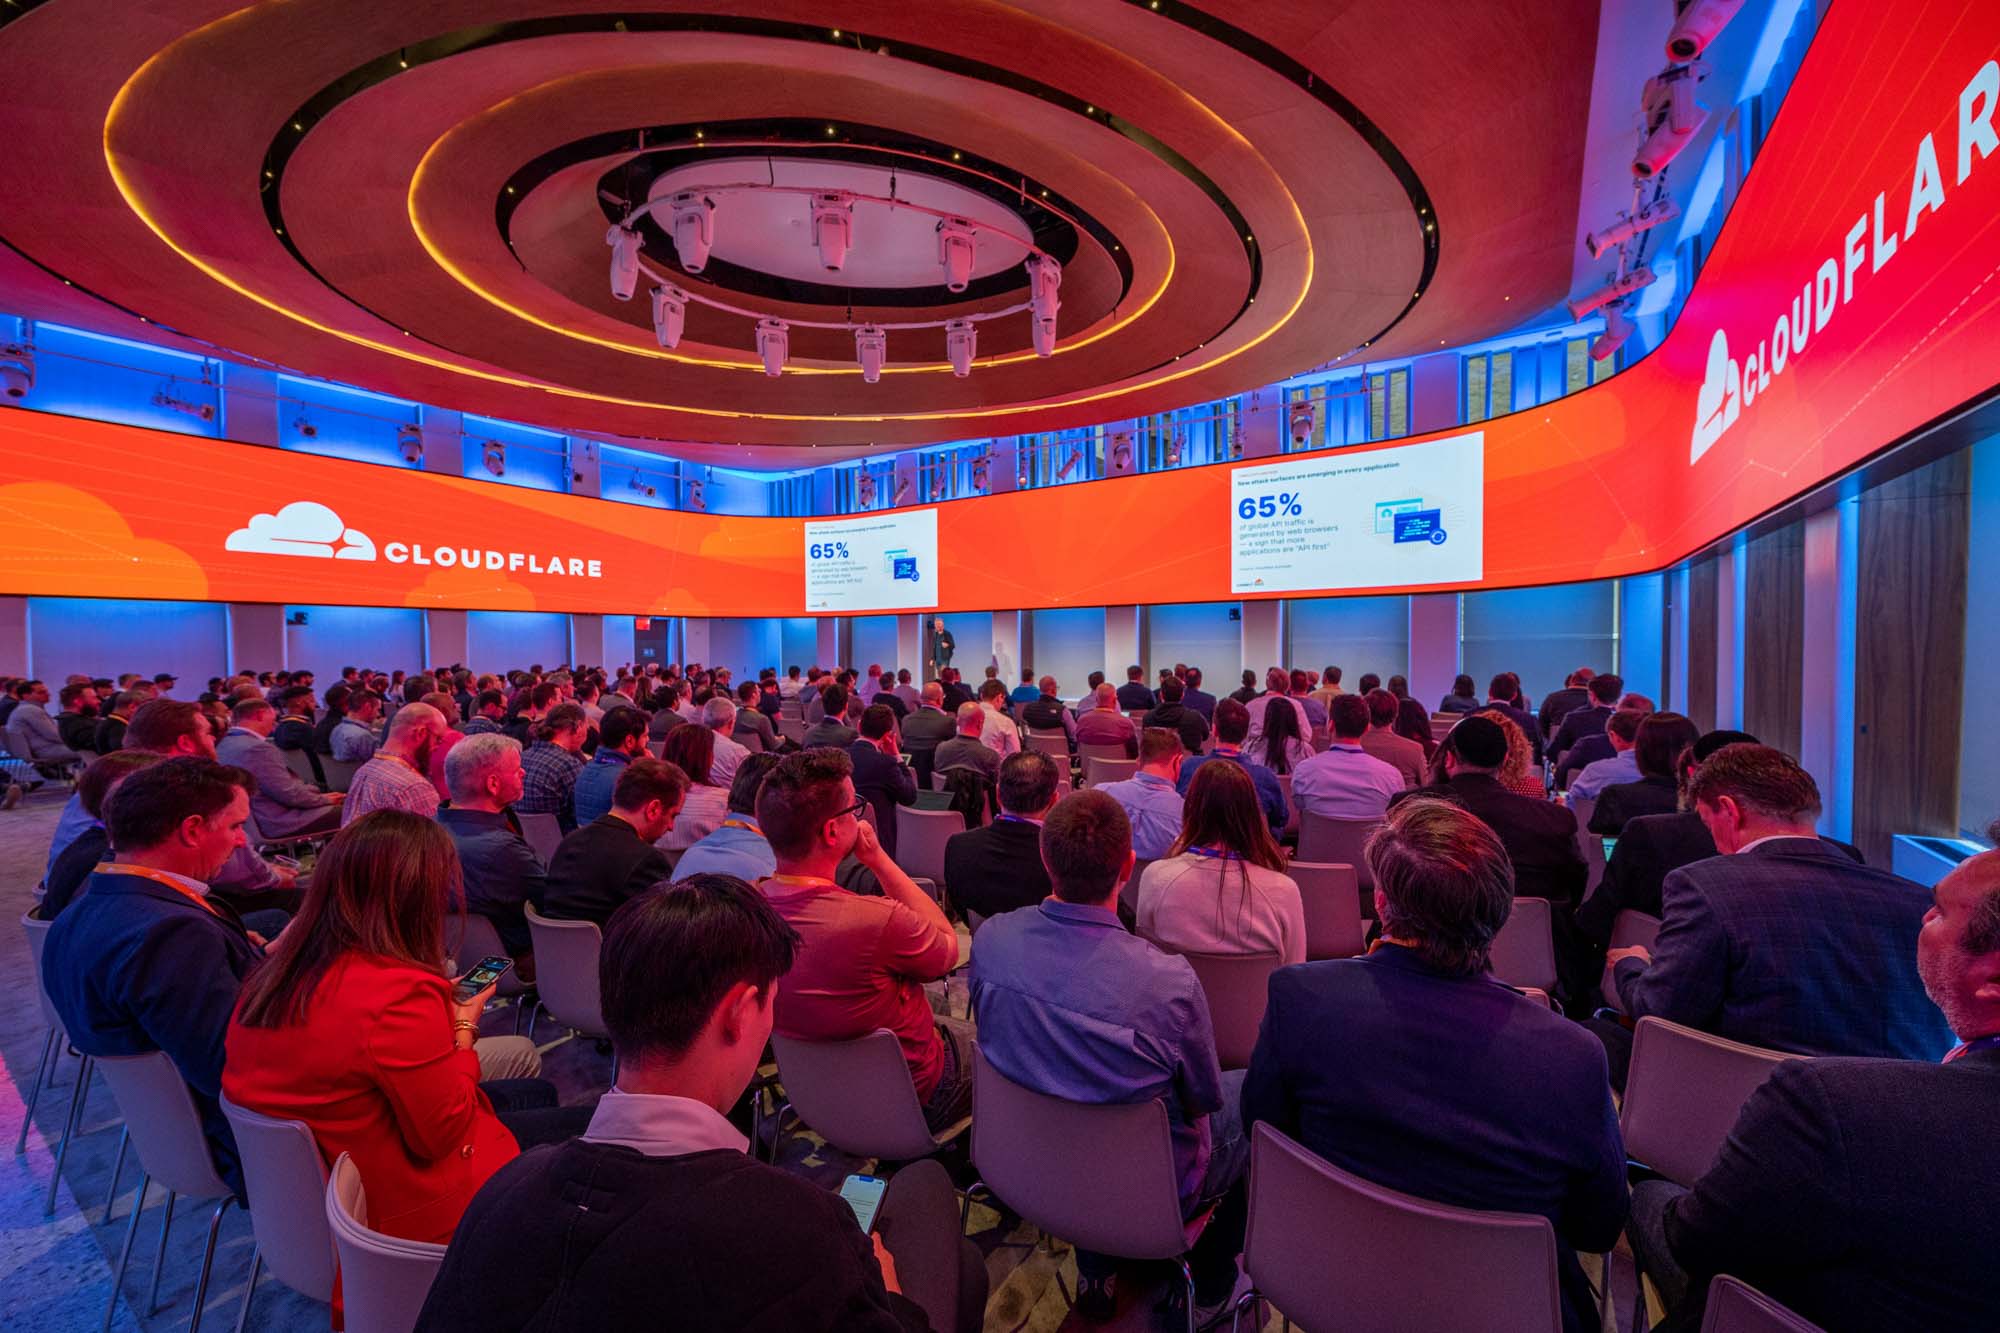 Cloudflare Corporate Event Keynote Session